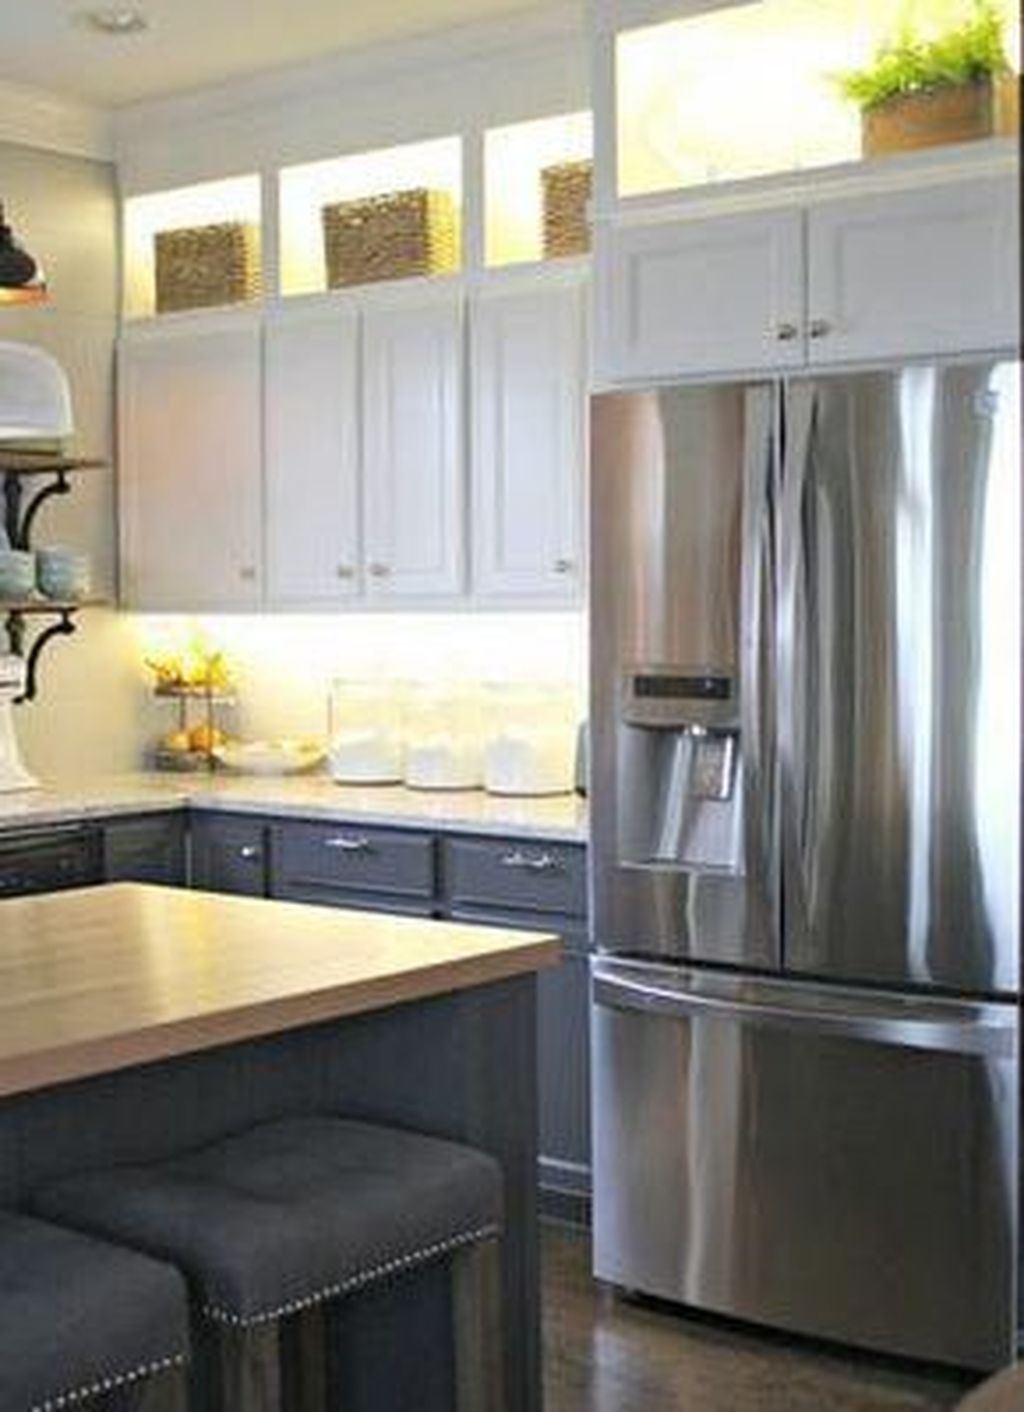 Cool Diy Kitchen Design Ideas You Will Definitely Want To Keep 23